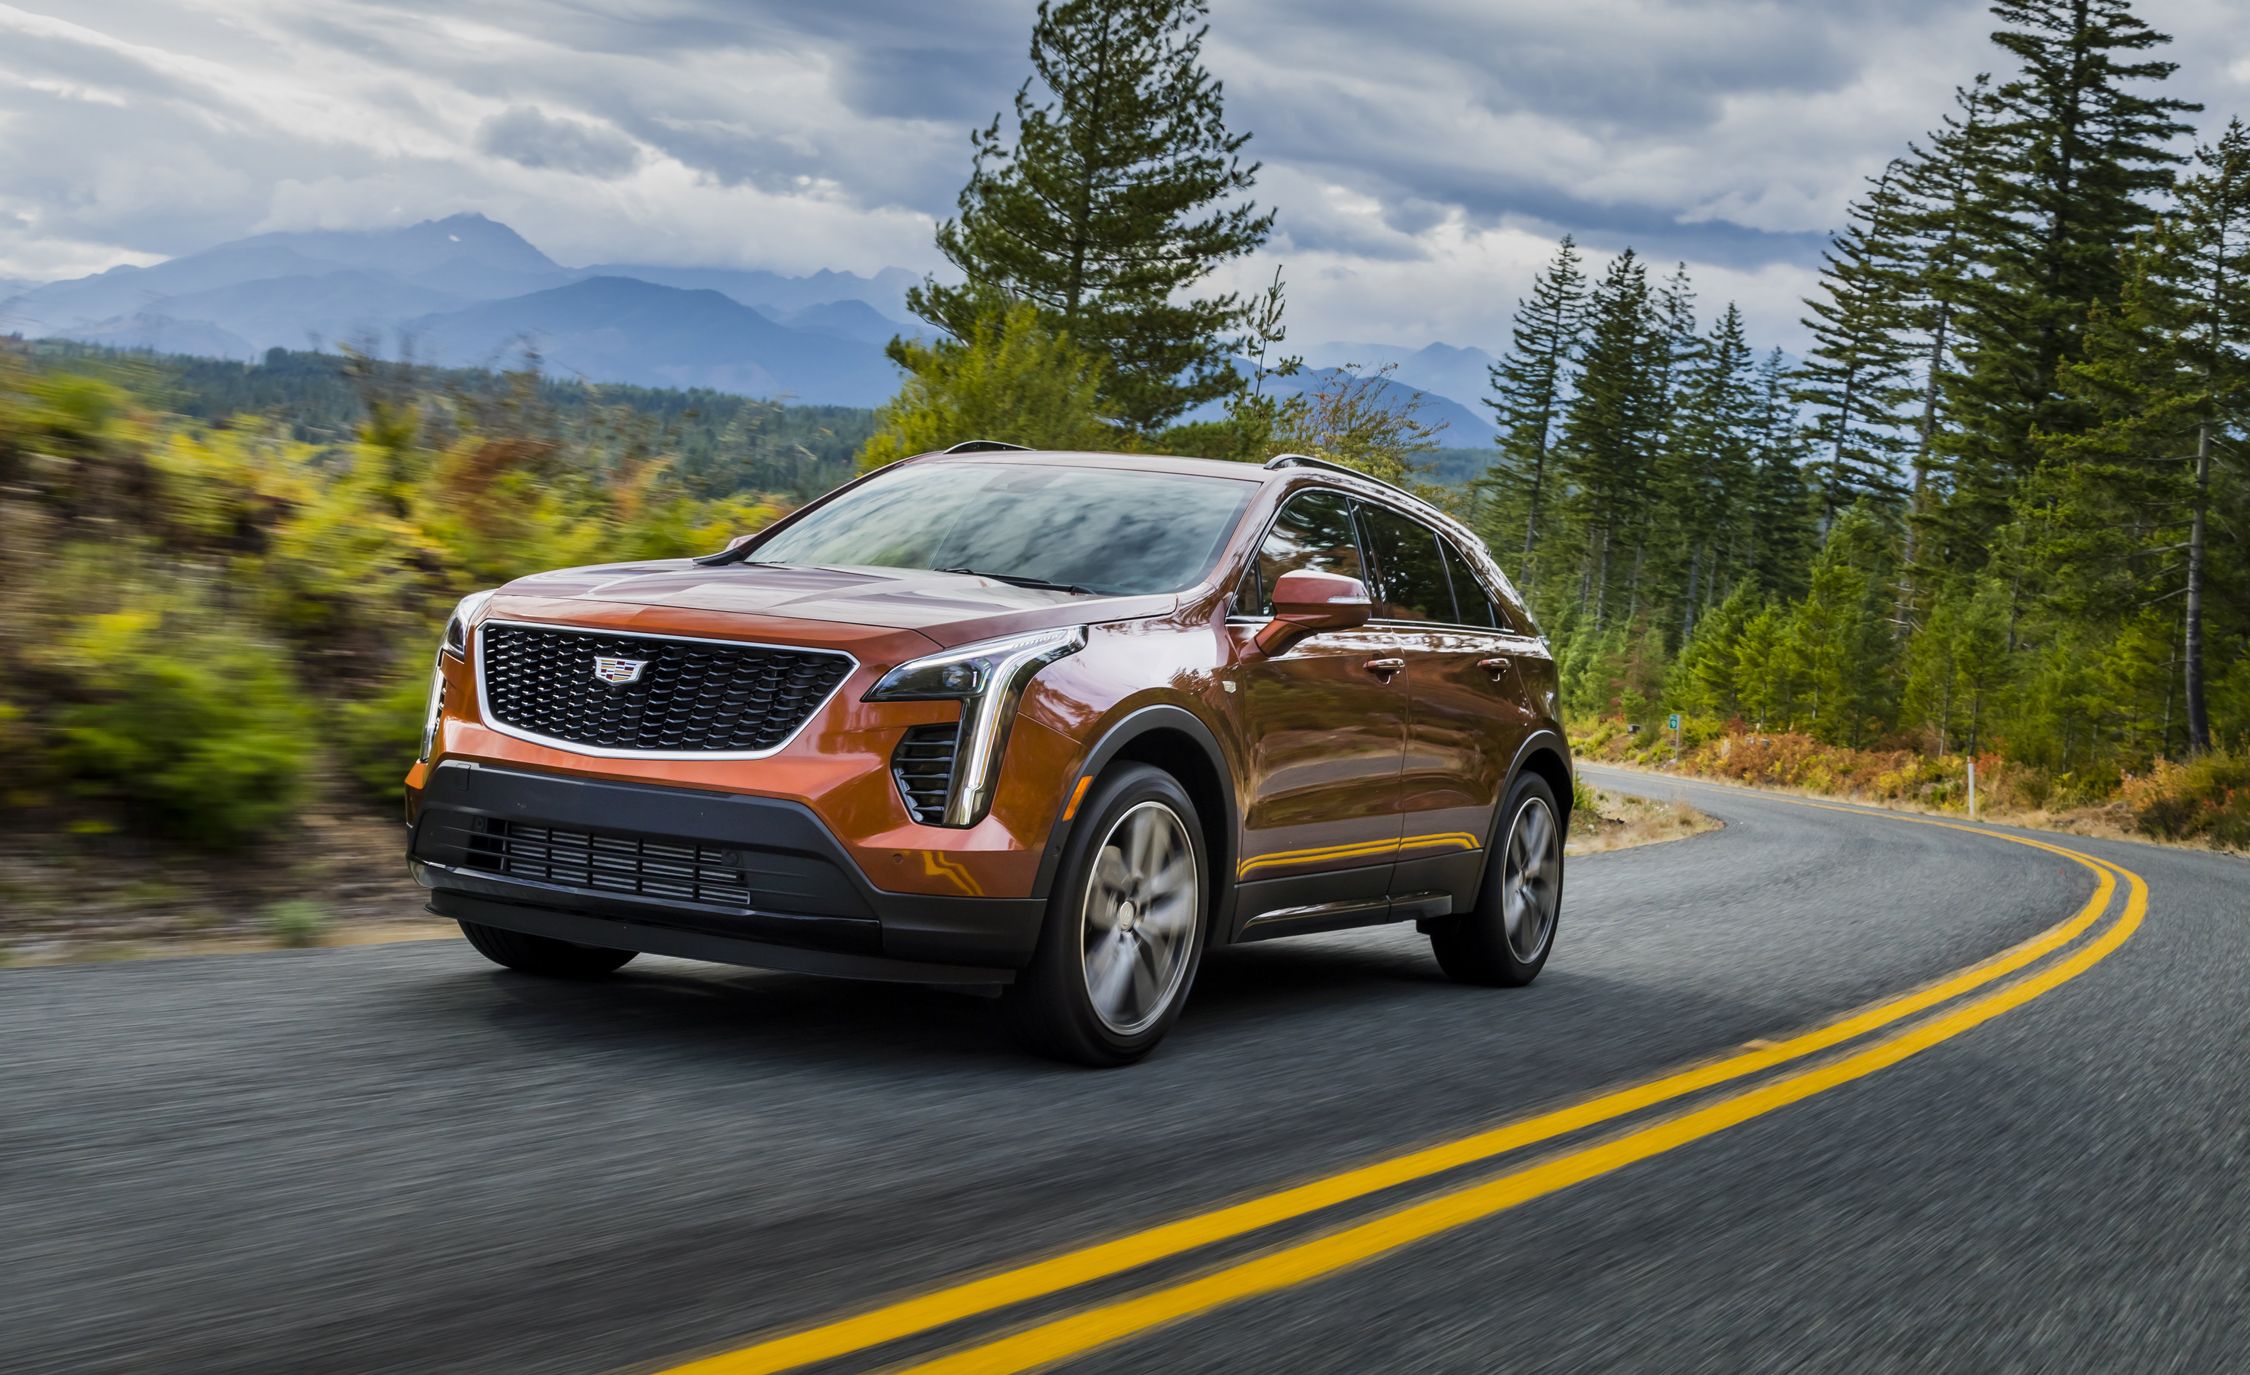 The 2019 Cadillac XT4 Is More Smooth Than Sporty